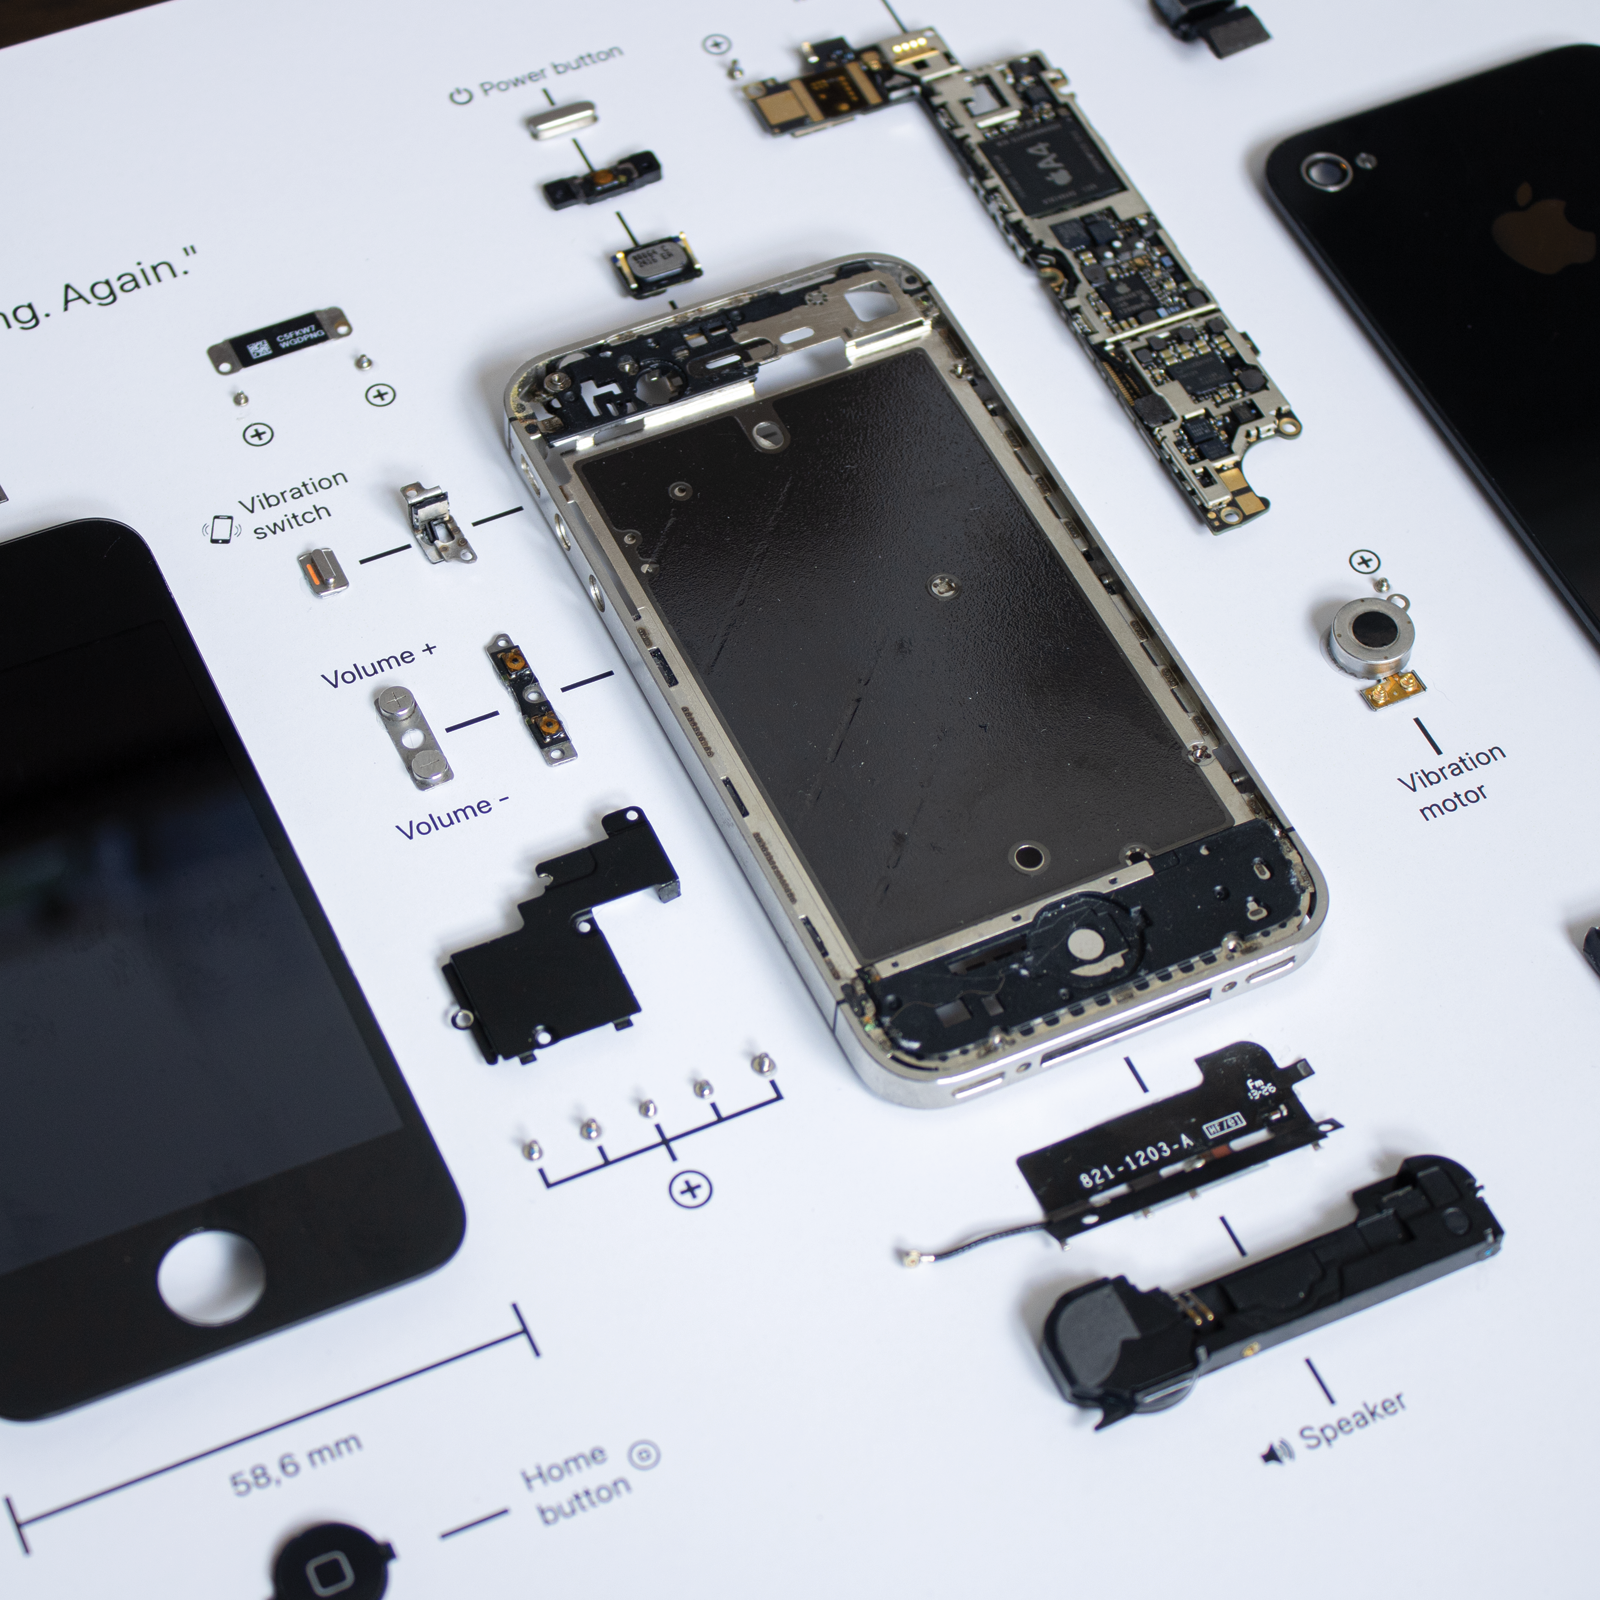 iPhone 4 USA disassembled in a frame